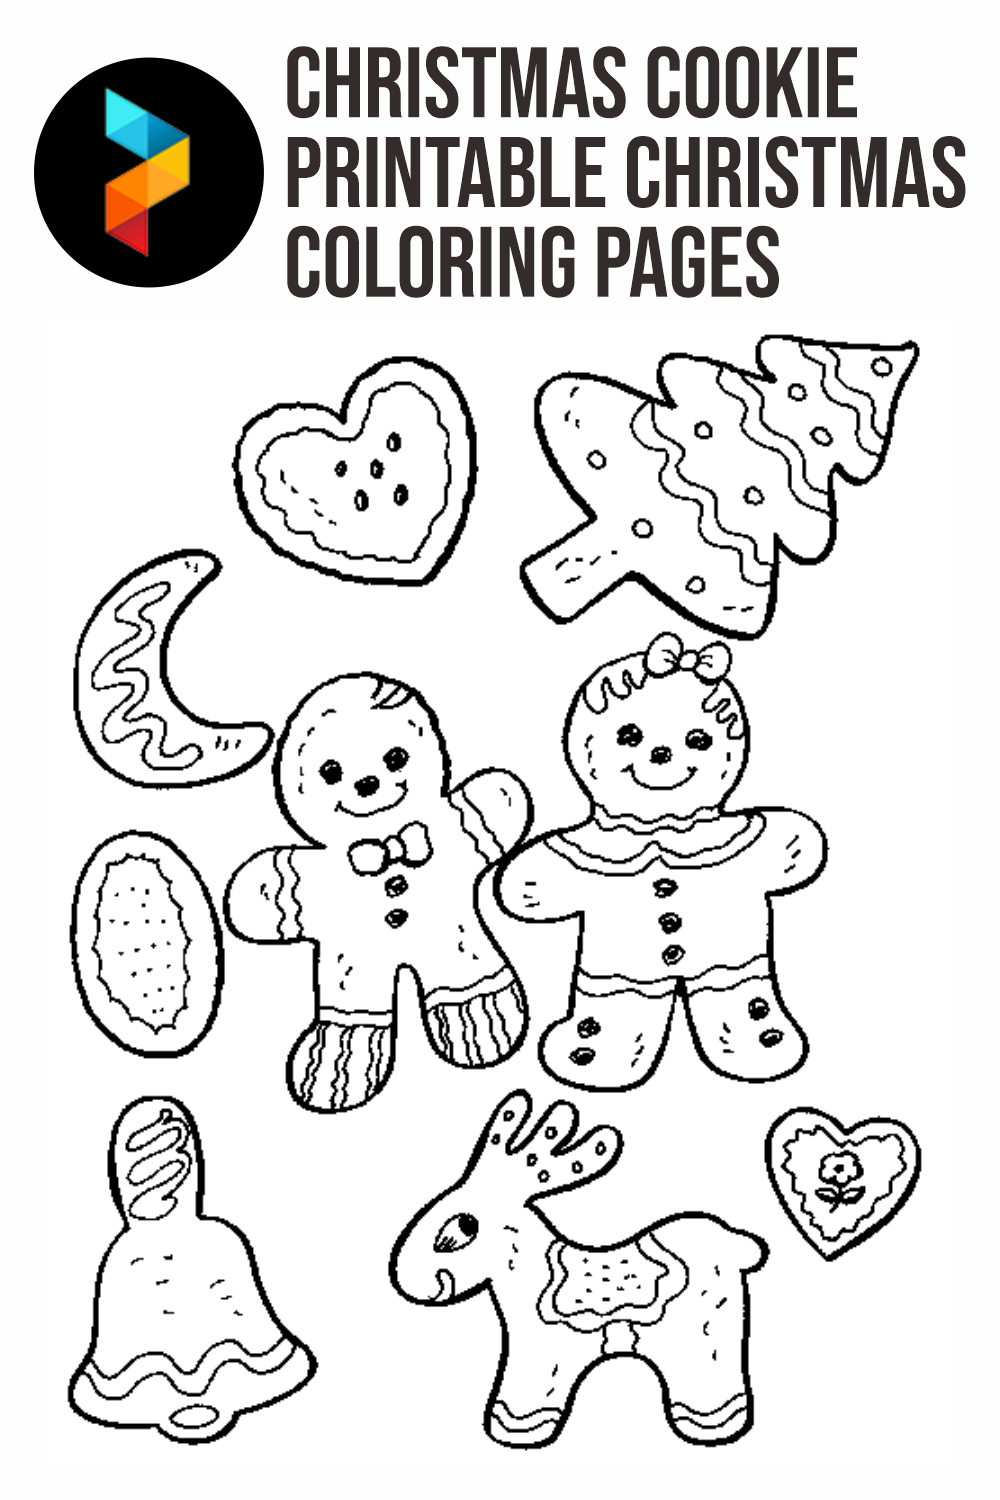 5 Best Christmas Cookie Printable Christmas Coloring Pages